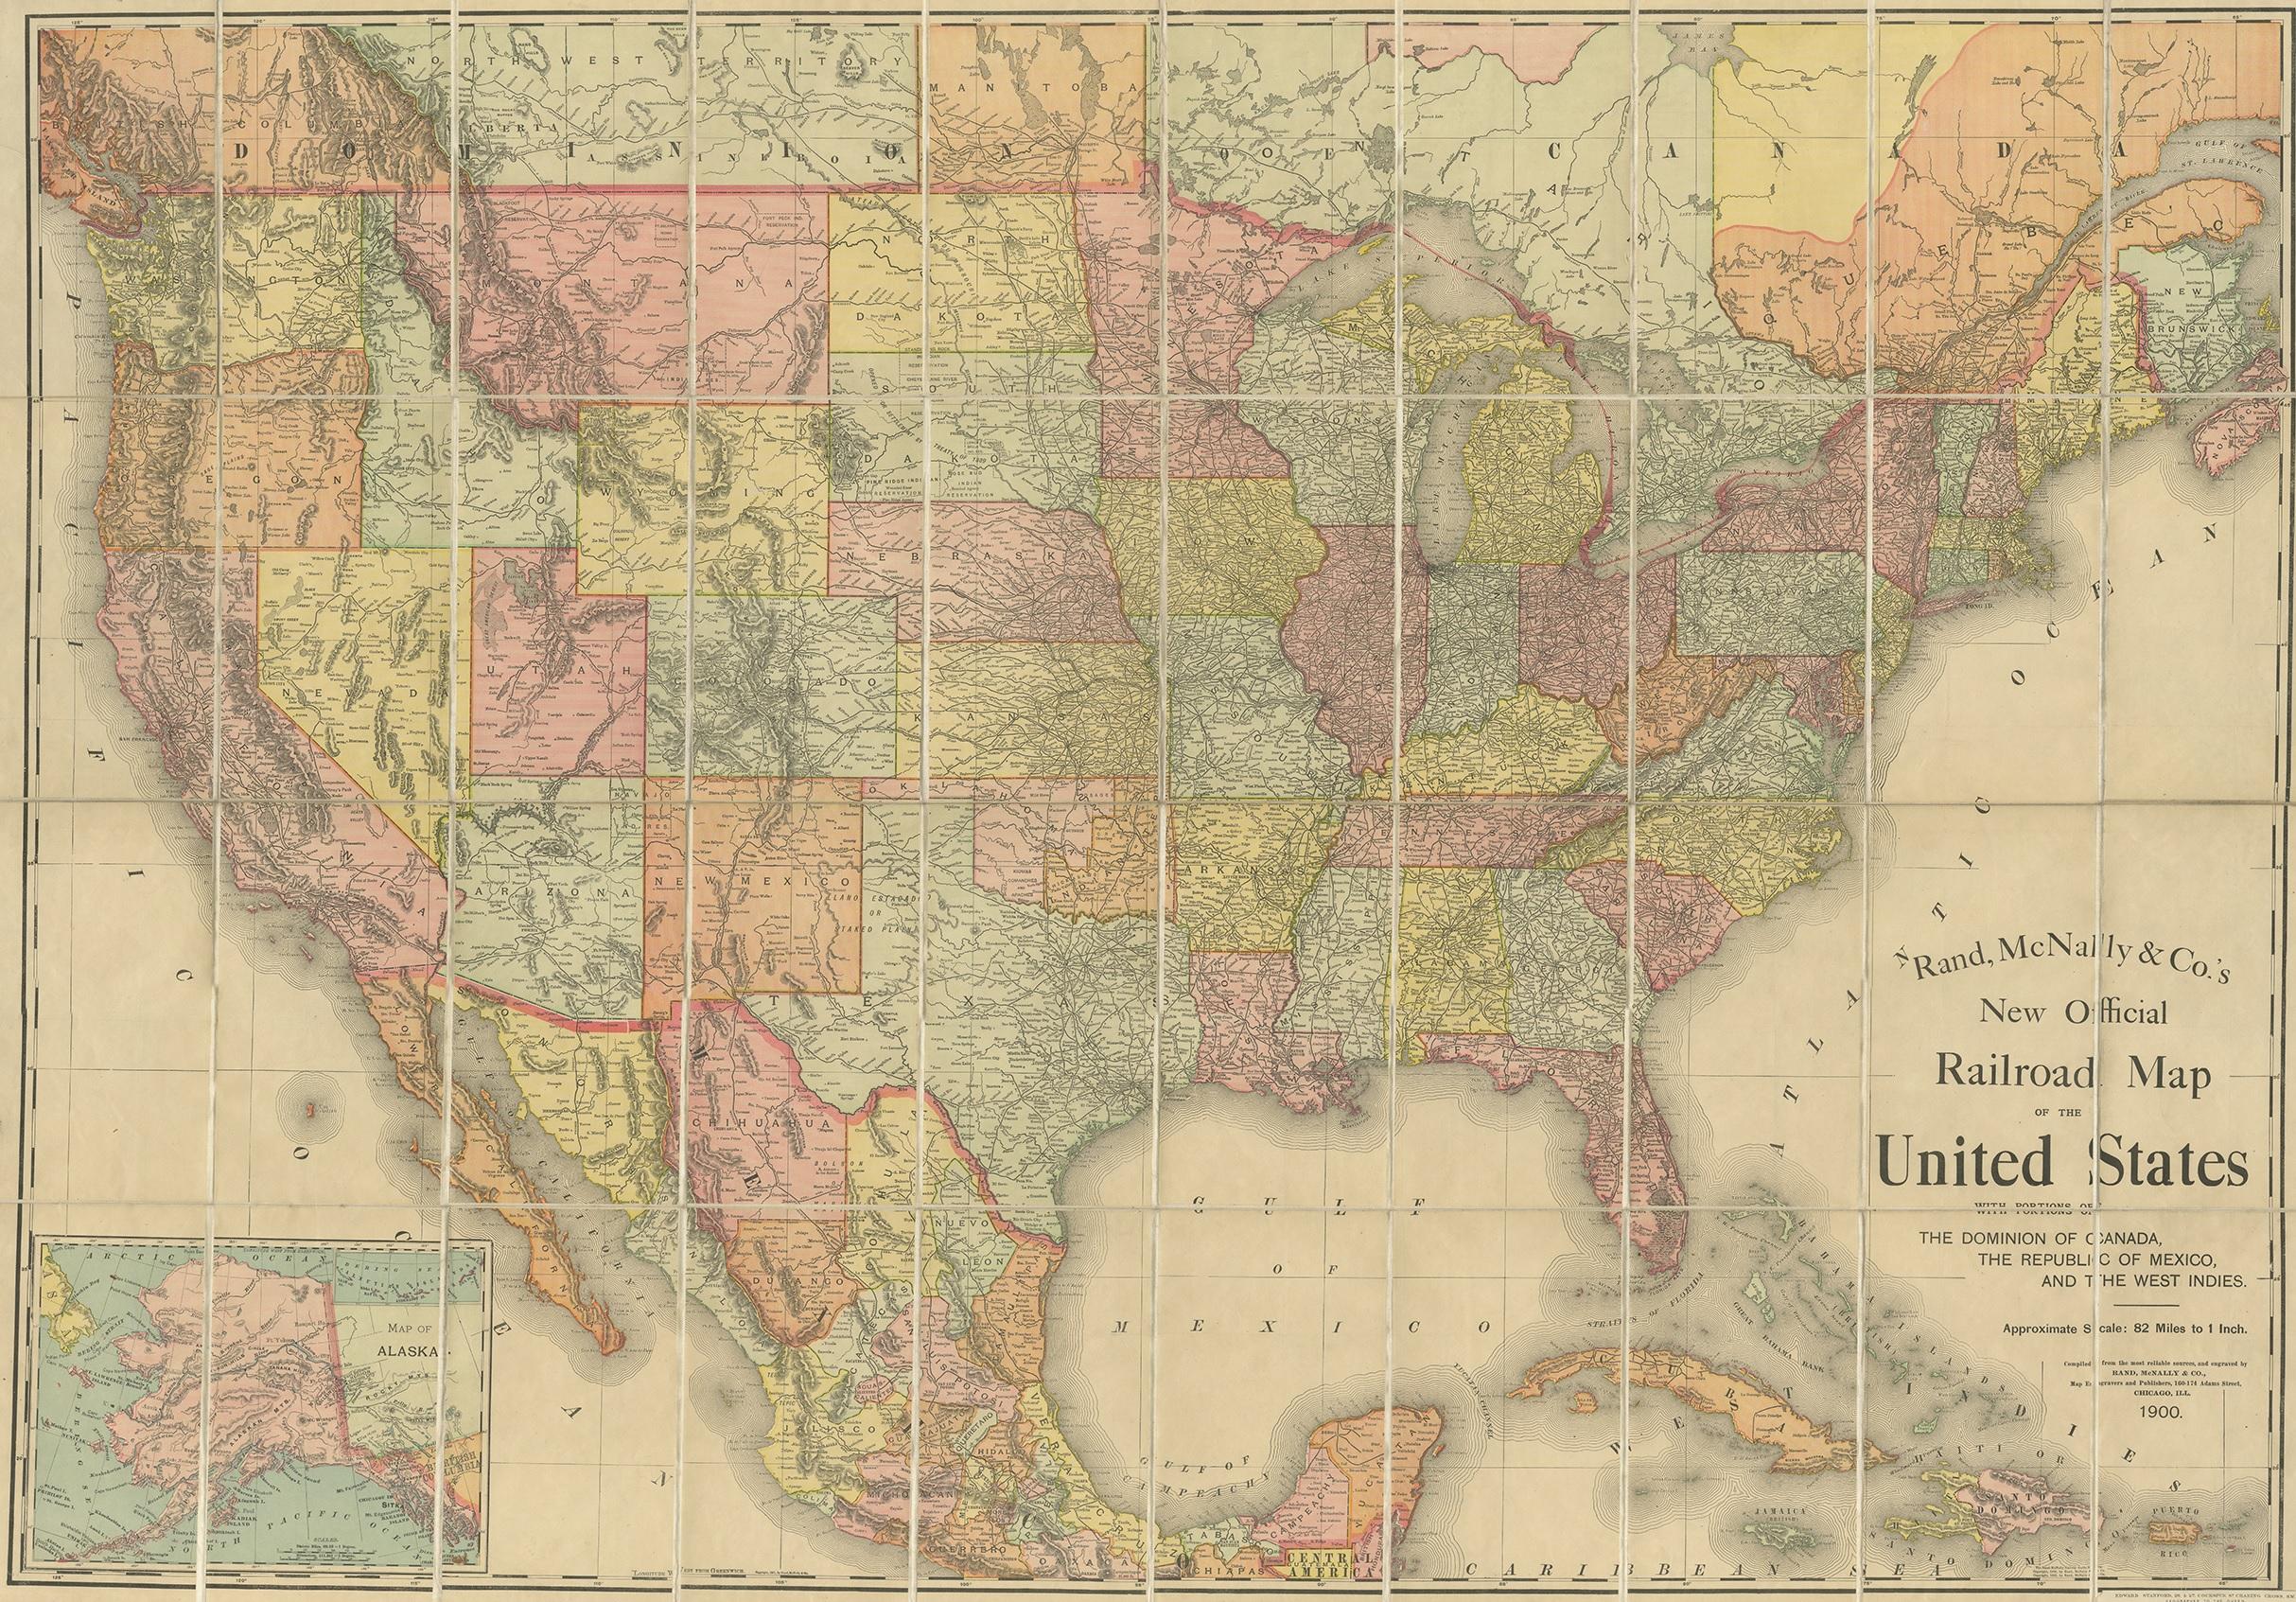 Antique map titled 'Rand, McNally & Co's New Official Railroad map of the United States with portions of The Dominion of Canada, The Republic of Mexico and the West Indies'. Large railroad map of the United States, sectionalised and laid on linen.